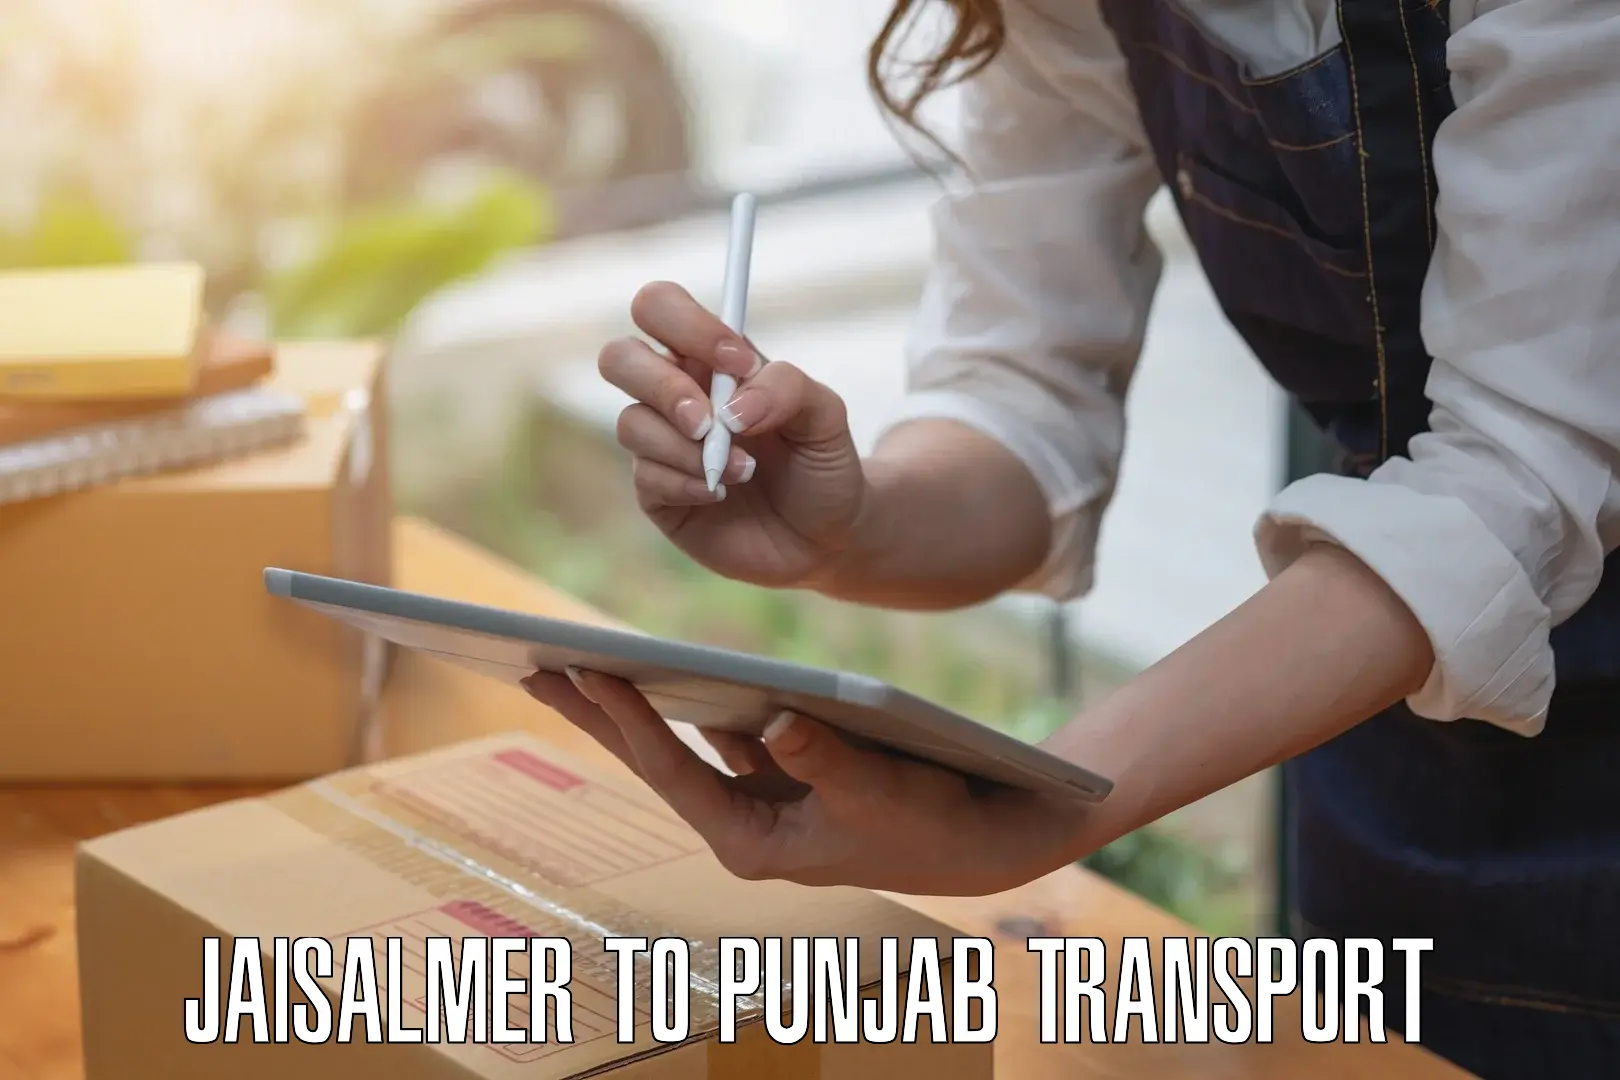 Transport bike from one state to another Jaisalmer to Punjab